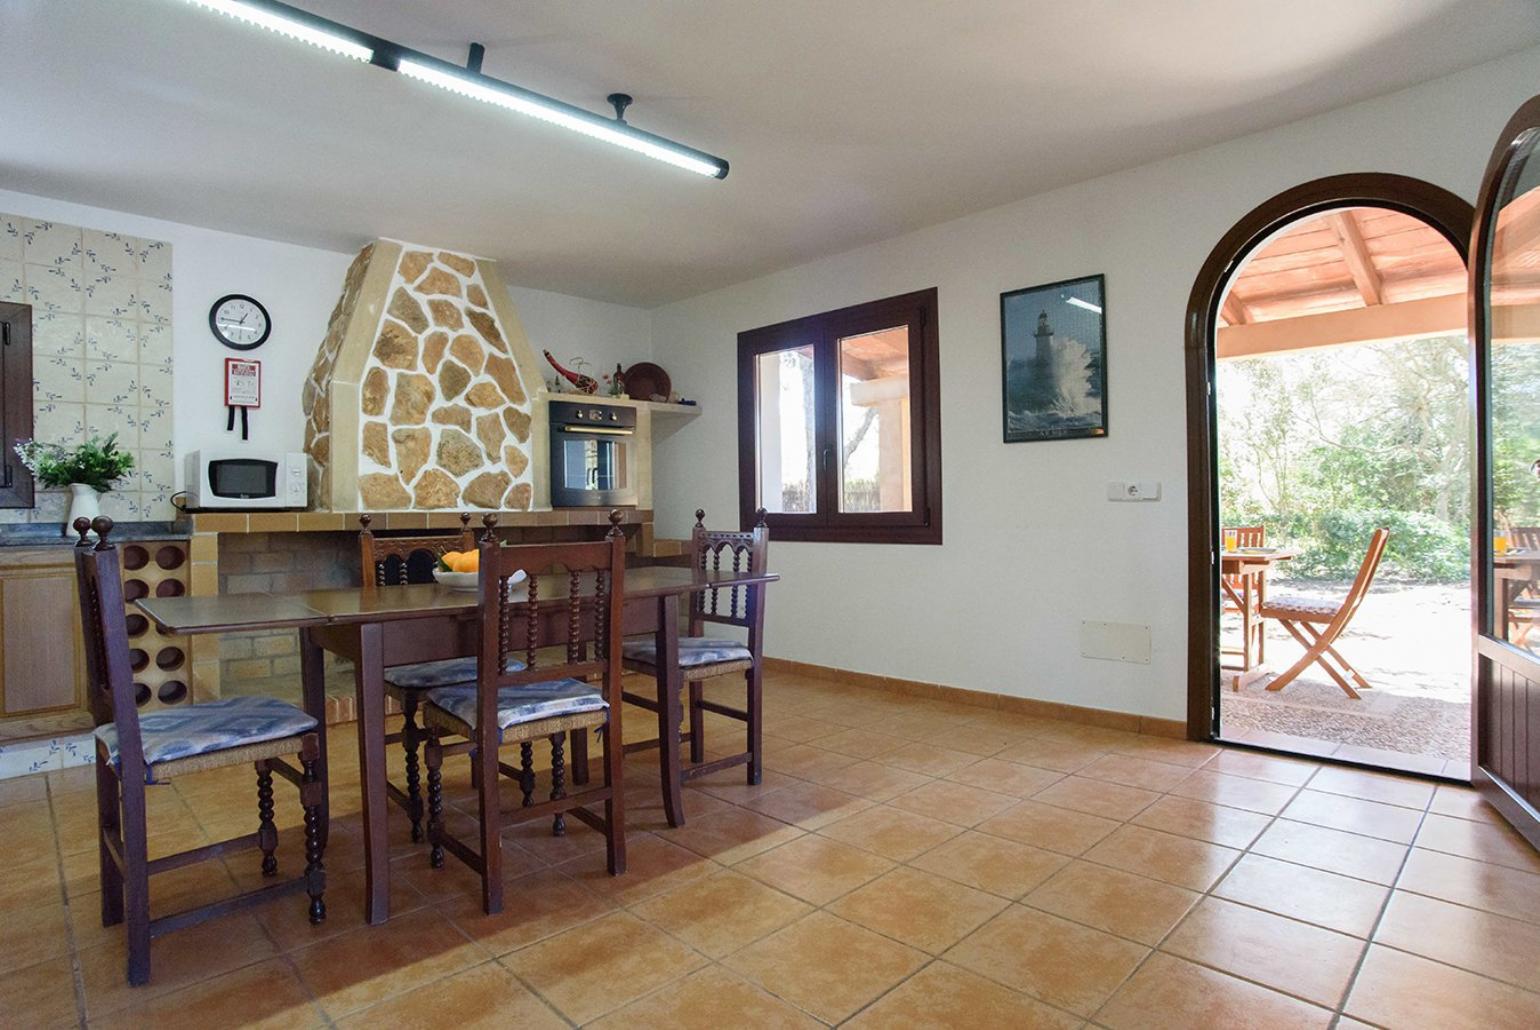 Equipped kitchen with dining area and terrace access